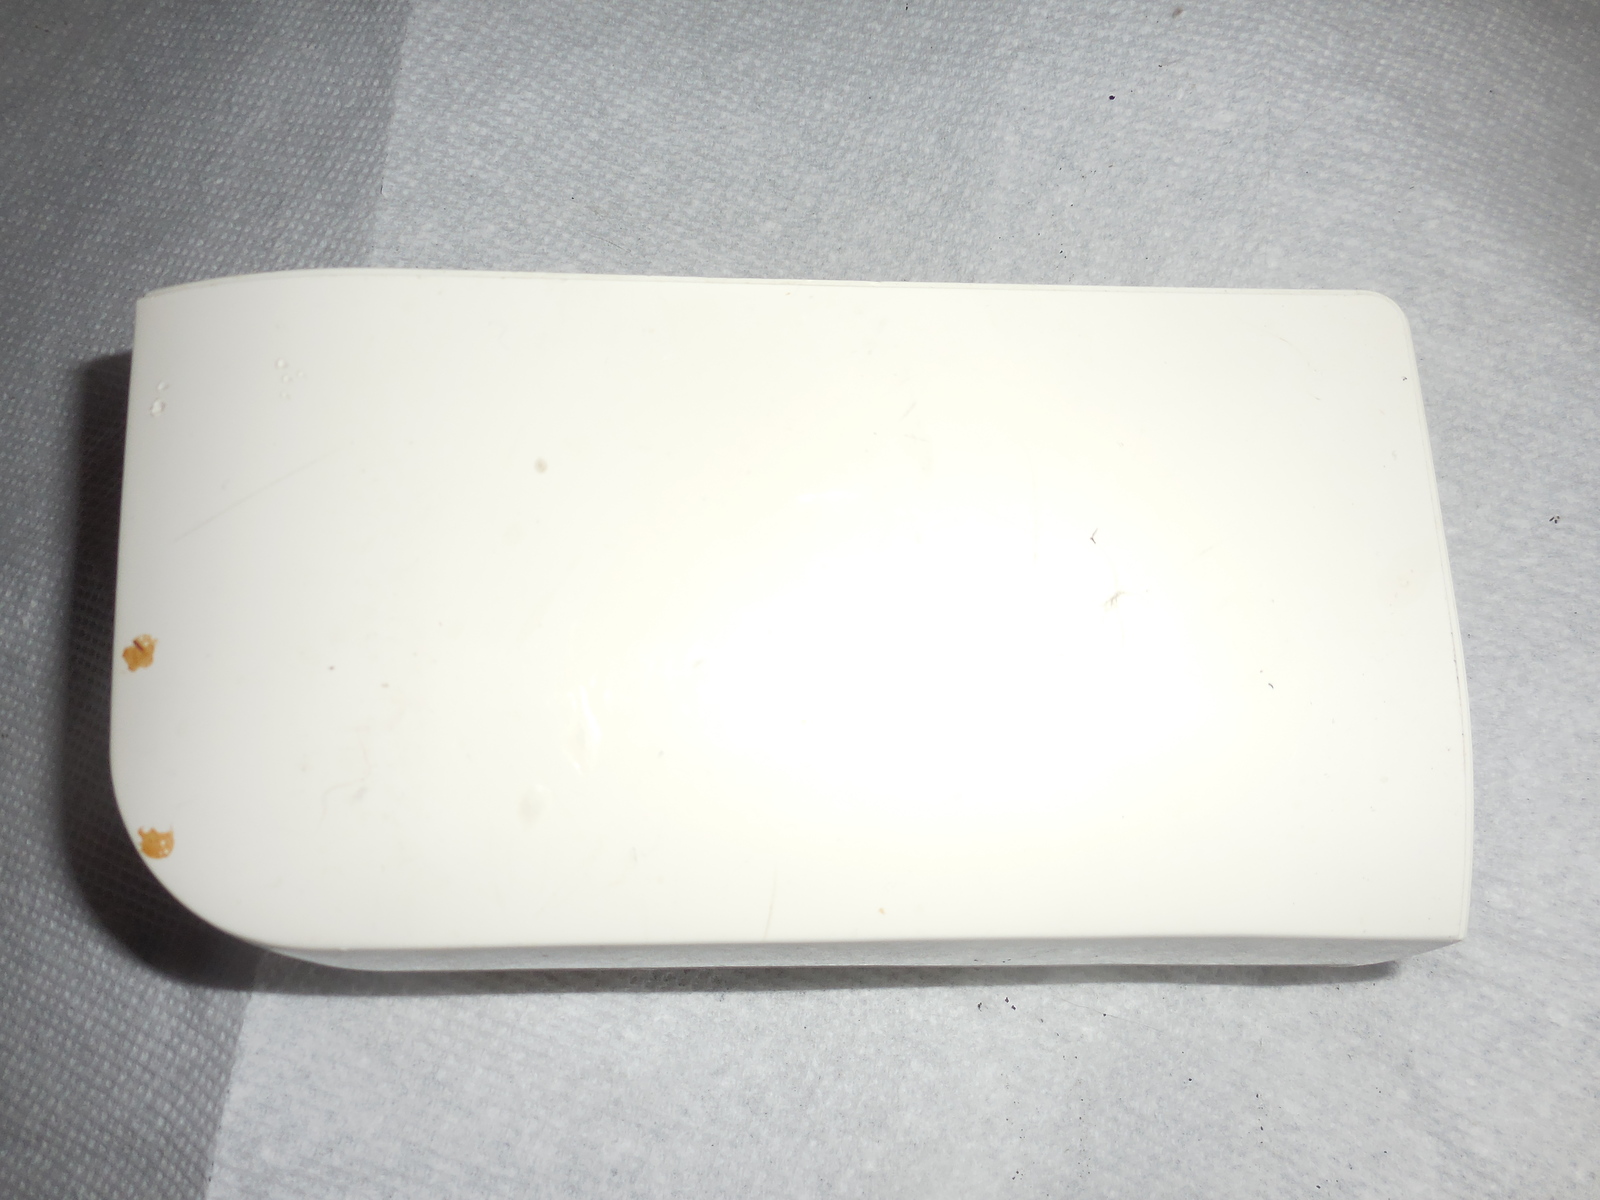 Brother XL-3025 Free Arm Plastic Table Extension Good Shape - $15.00